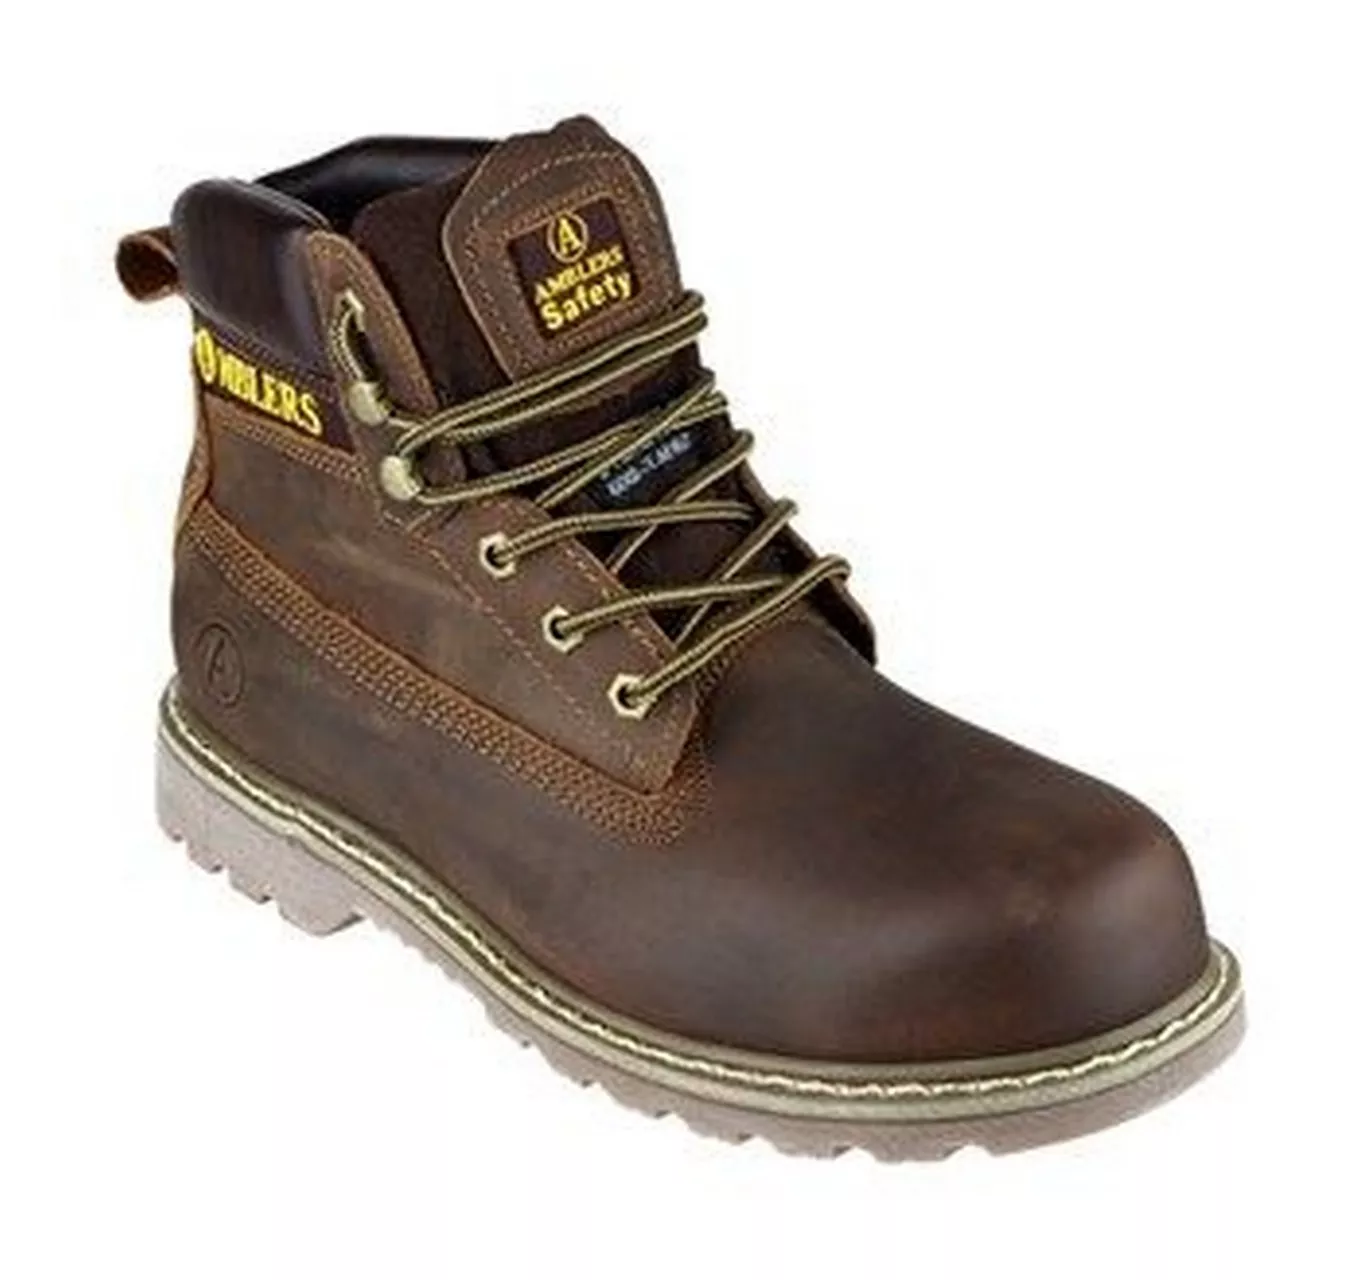 Safety Boot Amblers Fs164 Brown 10